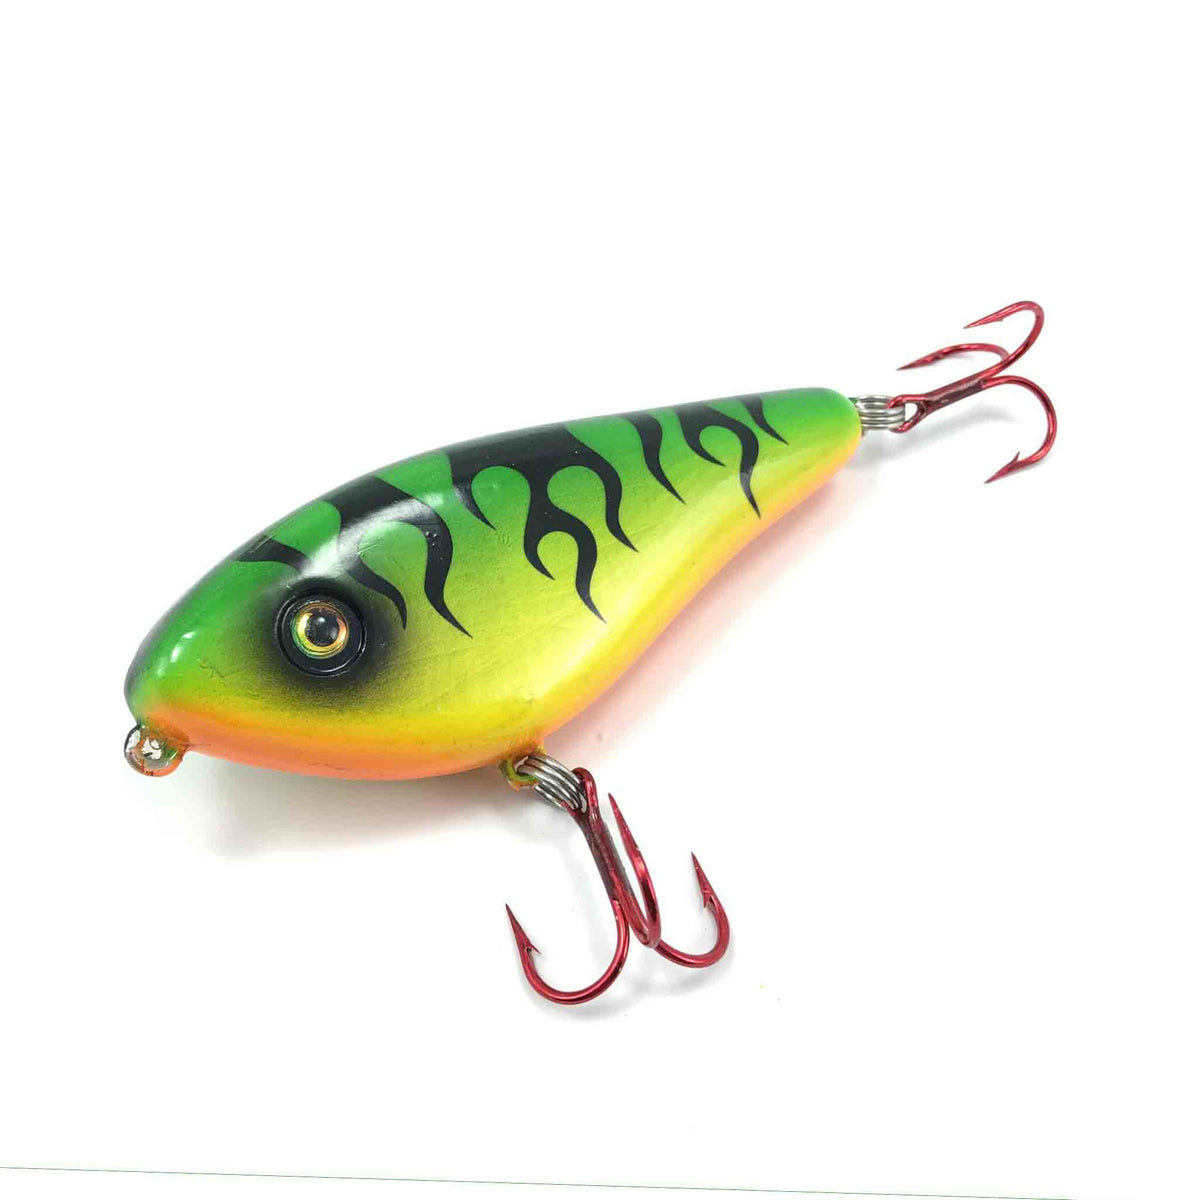 Carolina Fishing Tackle LLC - The Evergreen International ZE-73 is in stock  at Carolina Fishing Tackle. This is a 2-7/8 3/4oz lipless crankbait. The  bait stabilizes itself with an internal ribbed structure